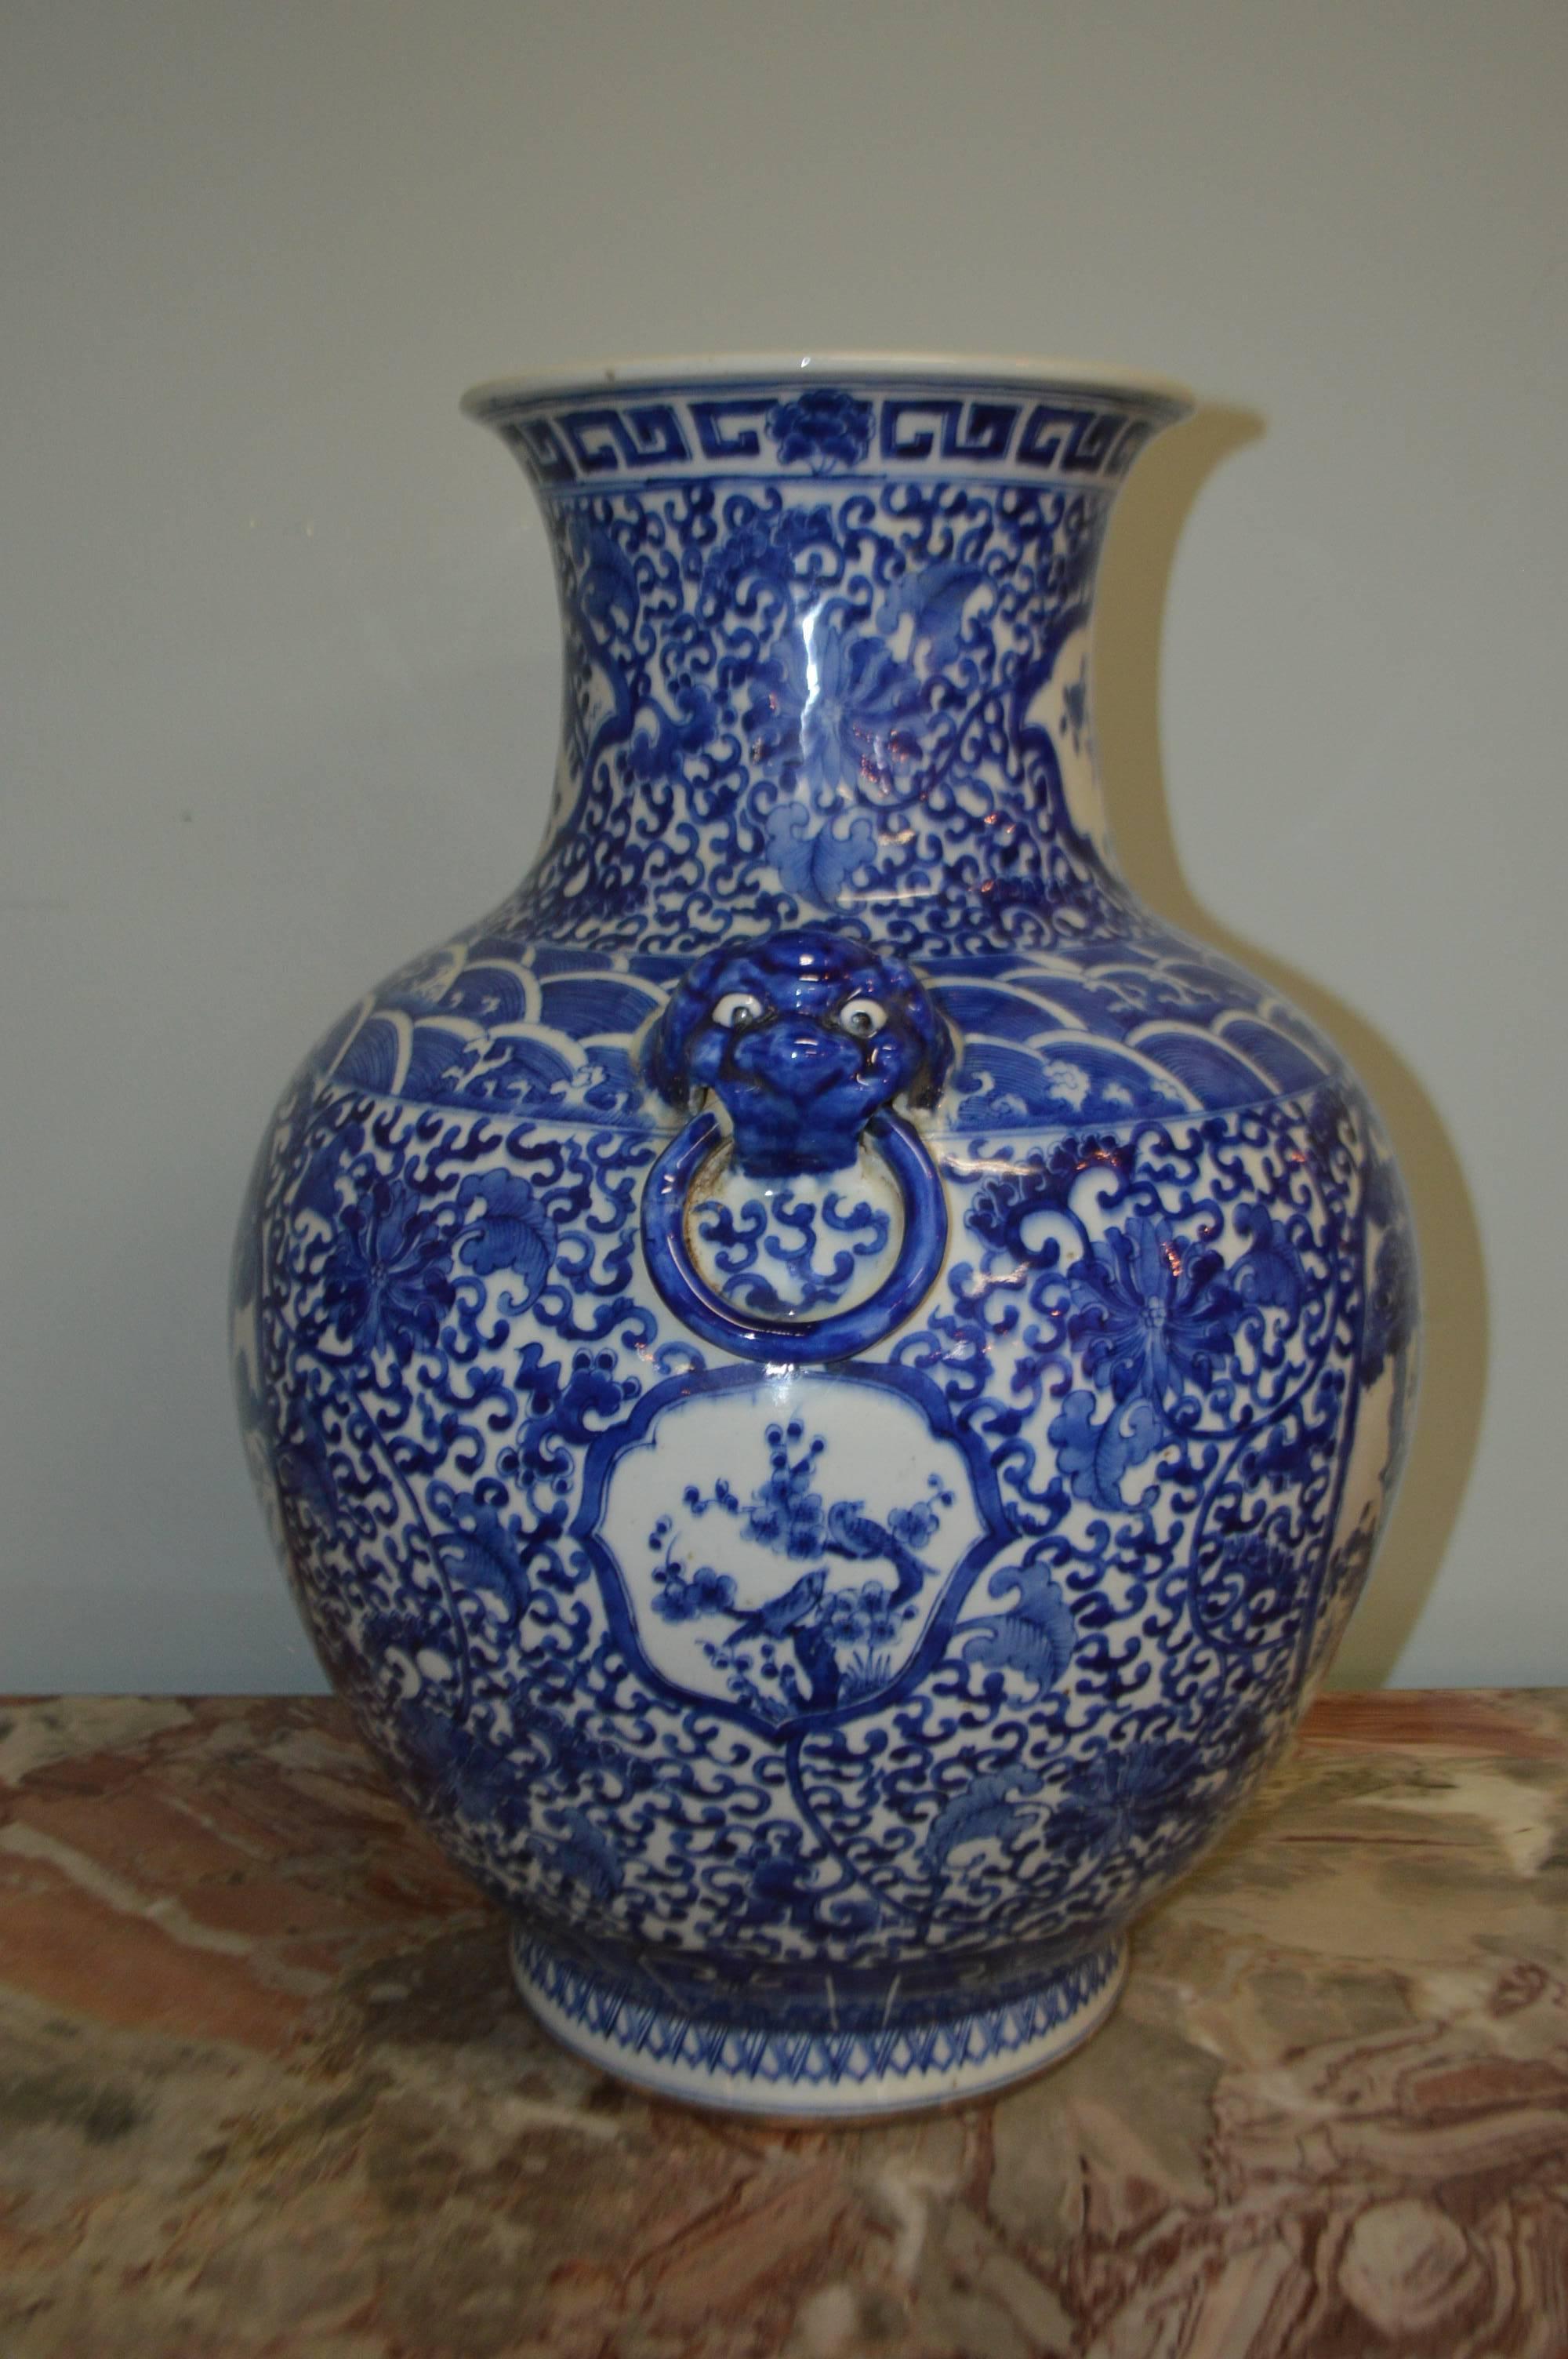 Decorative blue and white large Chinese vase, having two figural subjects on each side of the vase representing elders listening to music. There are two Foo handles on each side.
Maker marking under the vase.